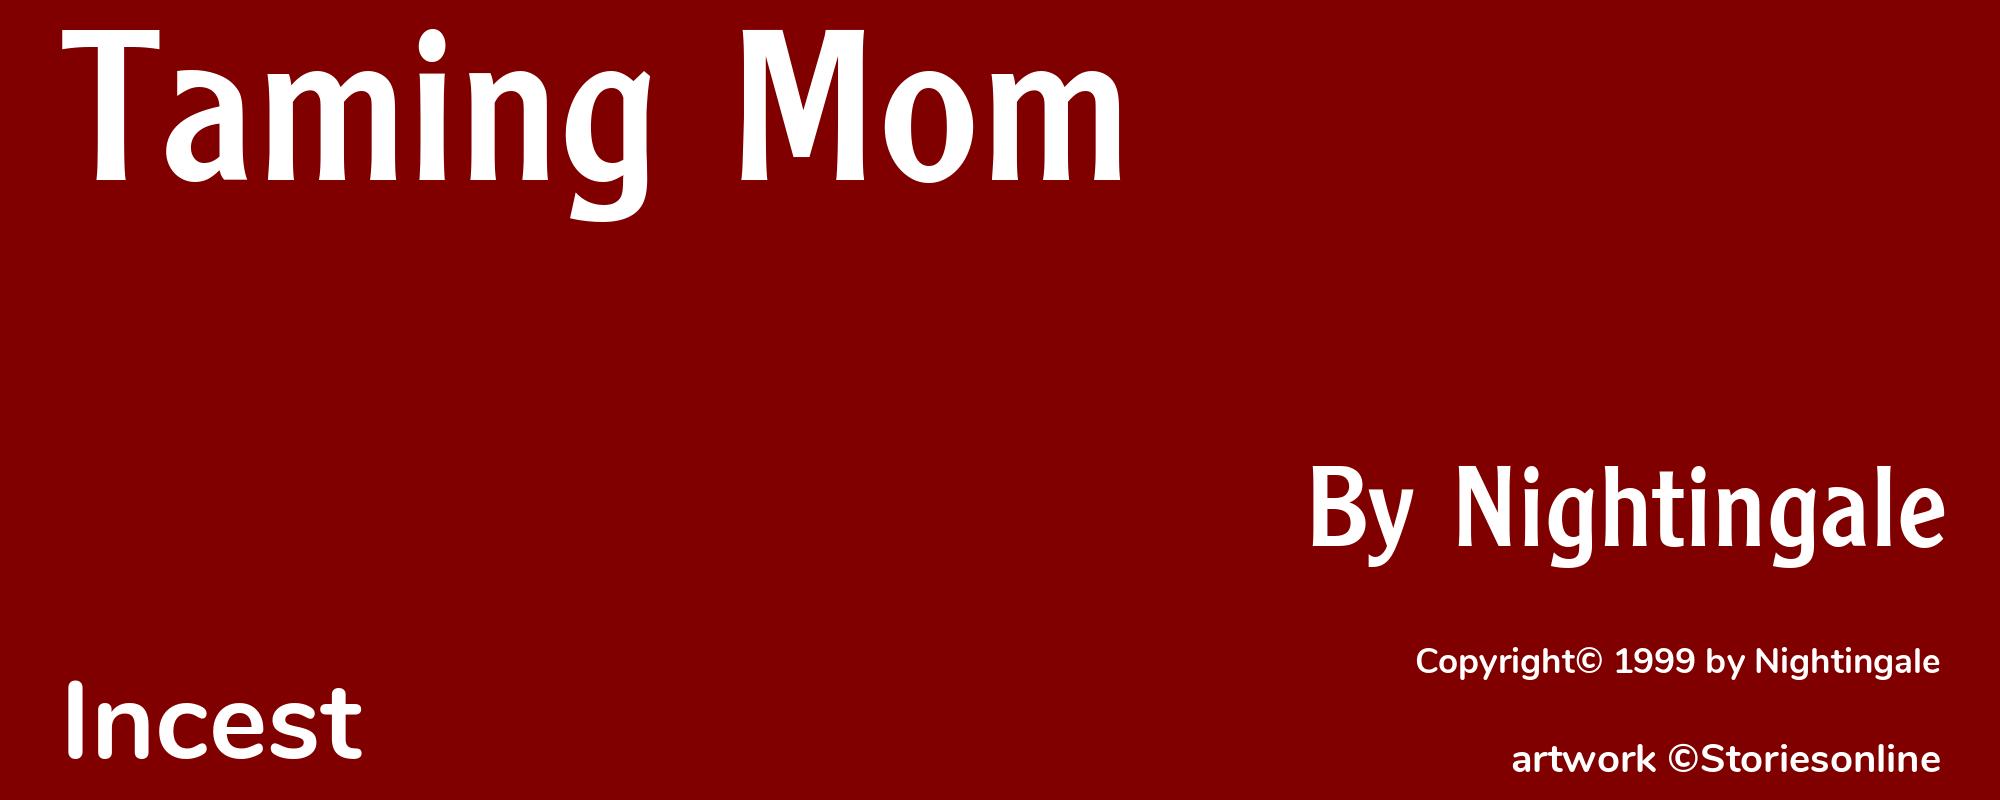 Taming Mom - Cover